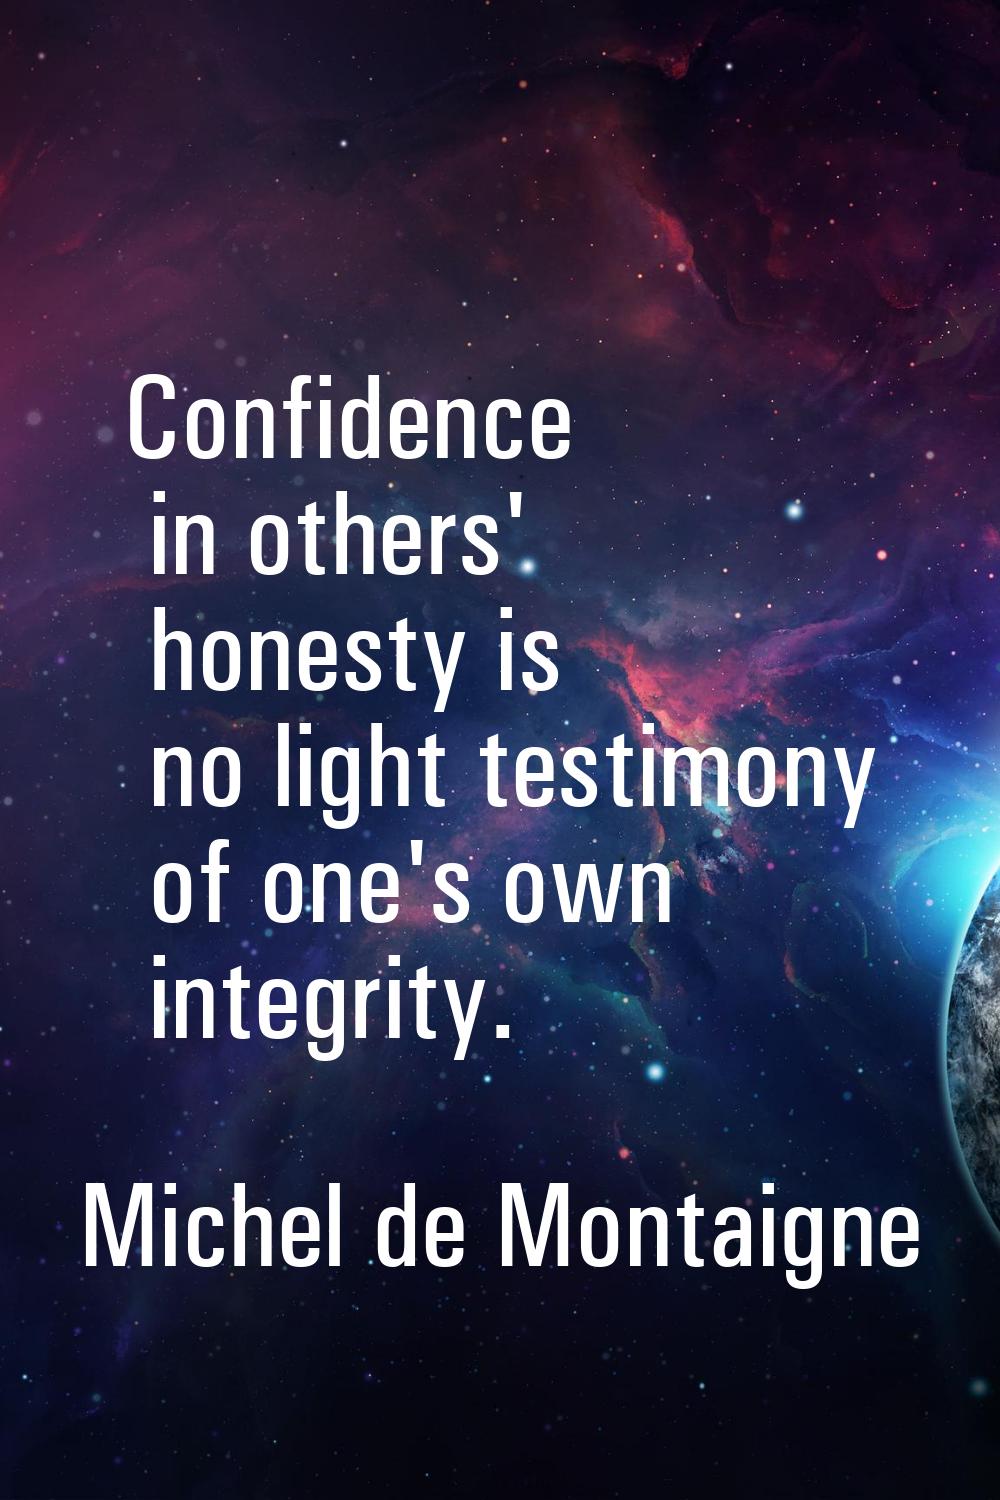 Confidence in others' honesty is no light testimony of one's own integrity.